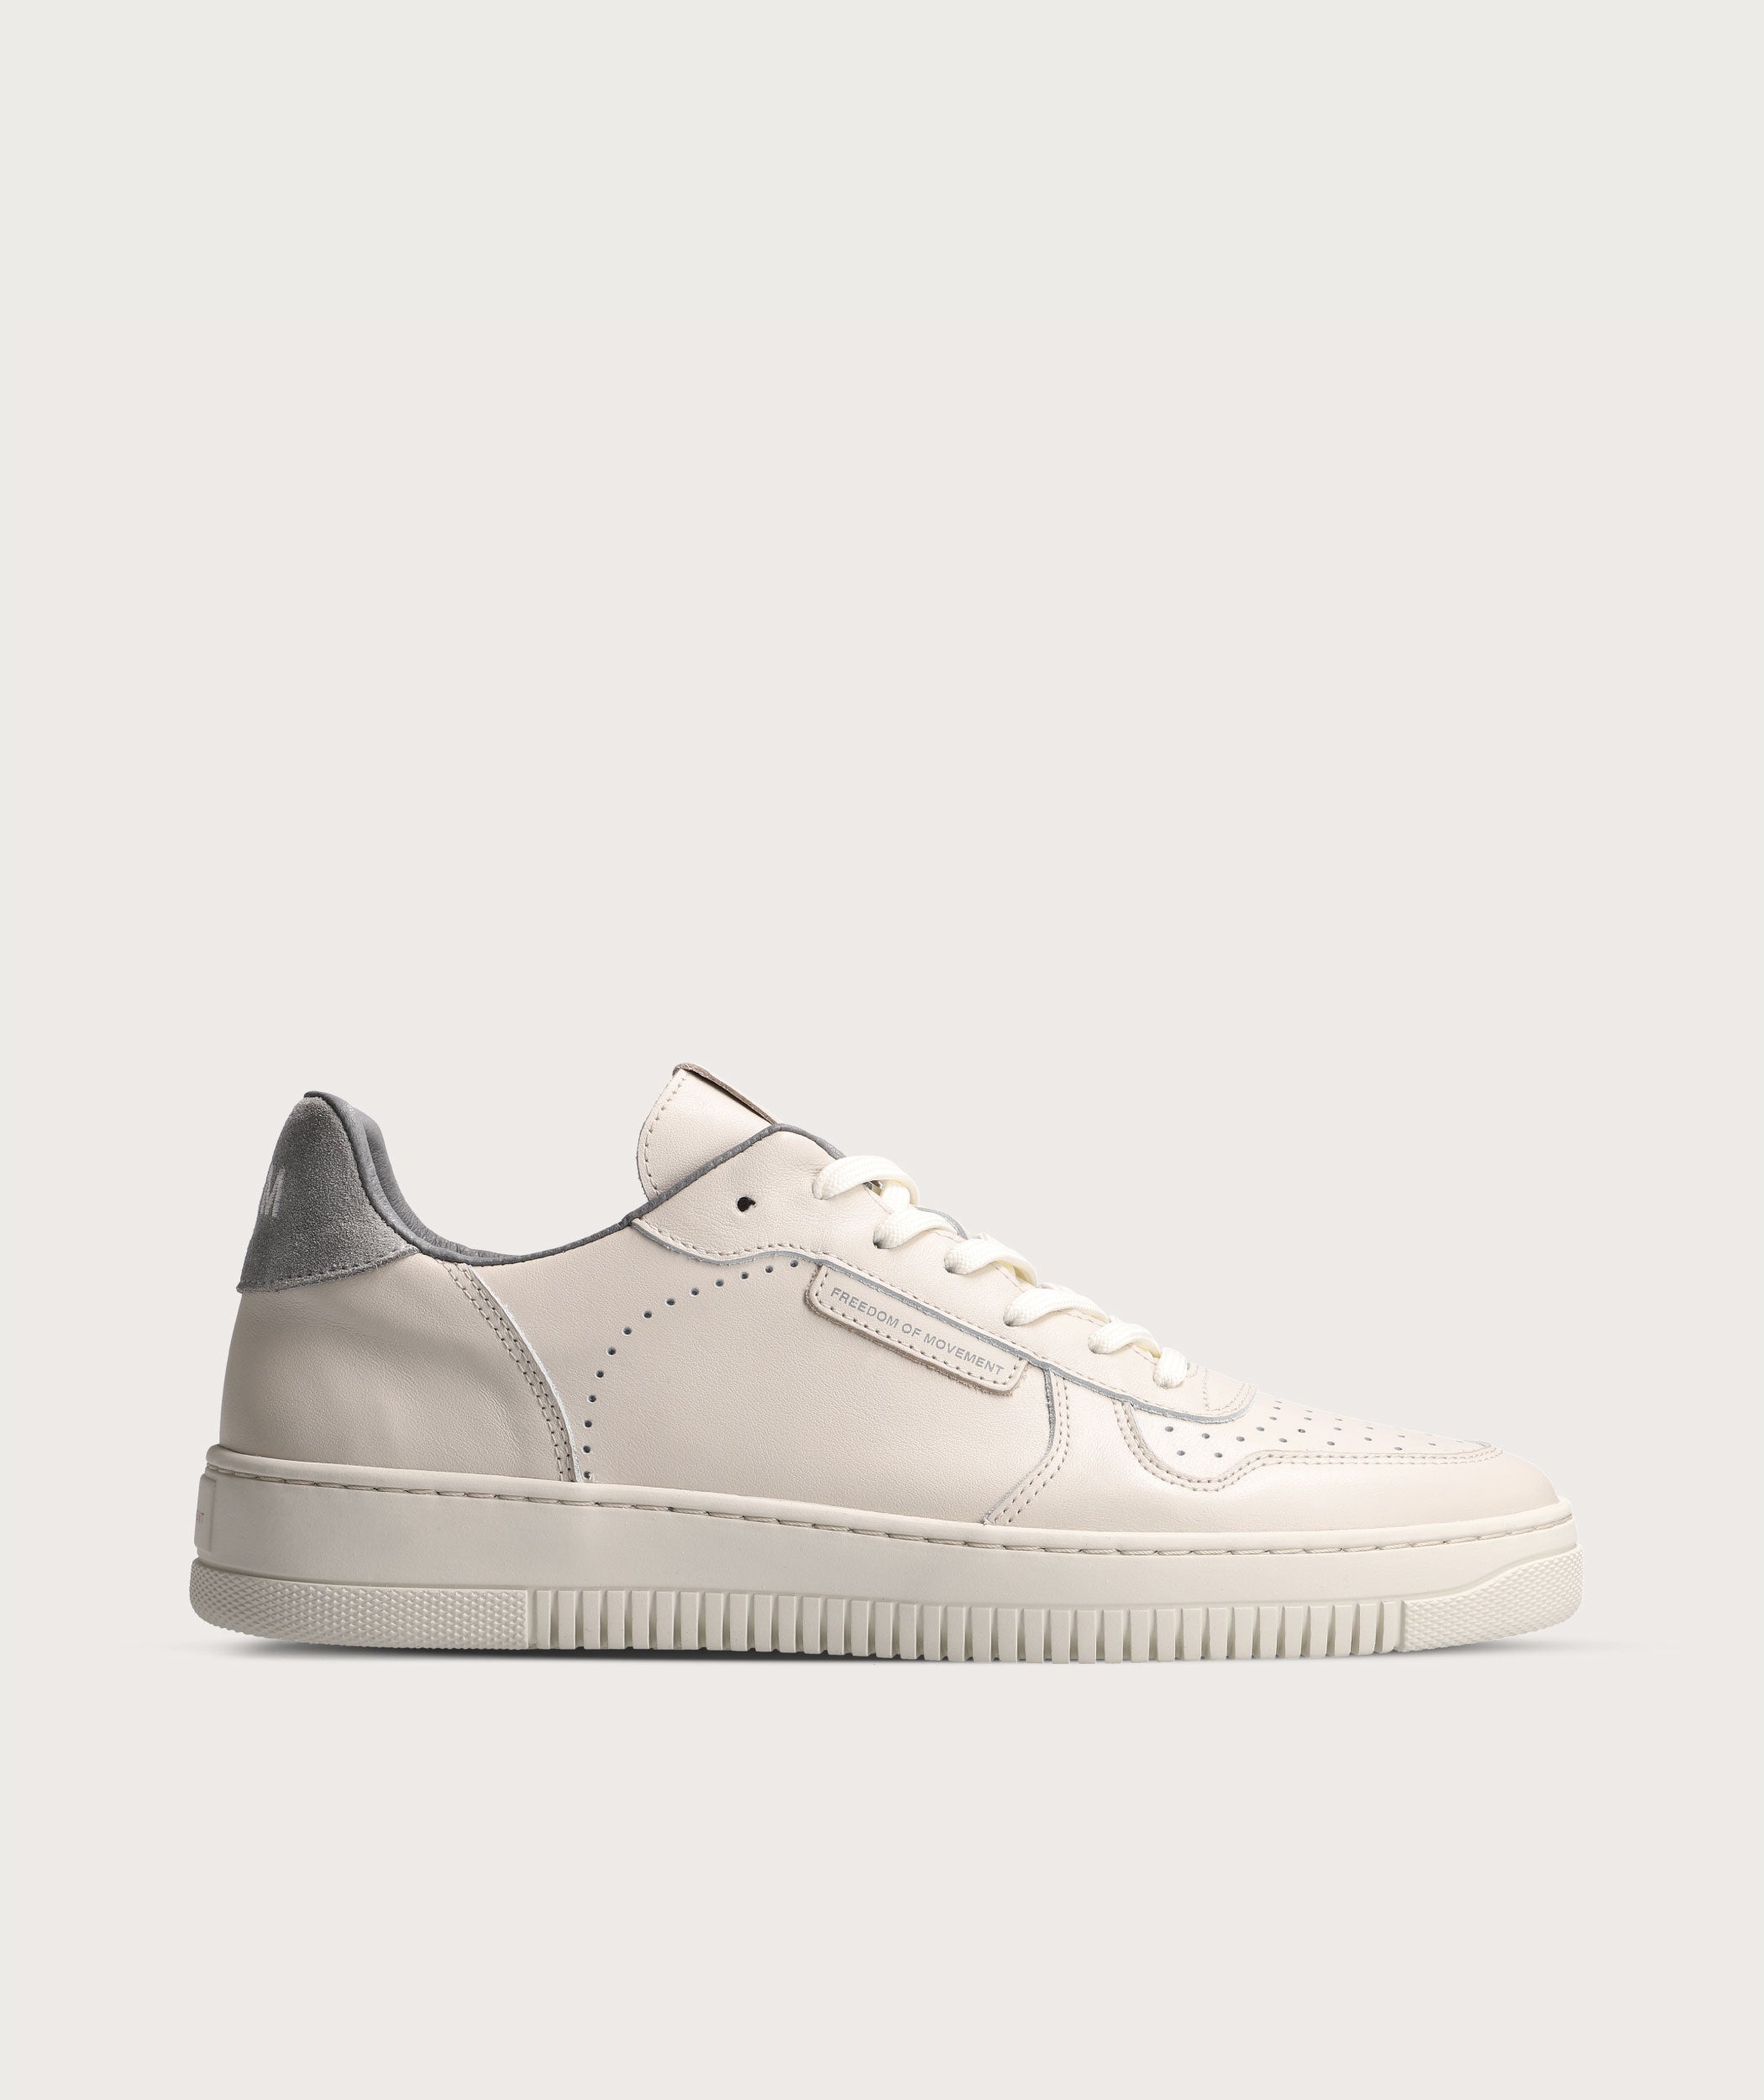 FOM Mens Trainers Off-White/ Storm